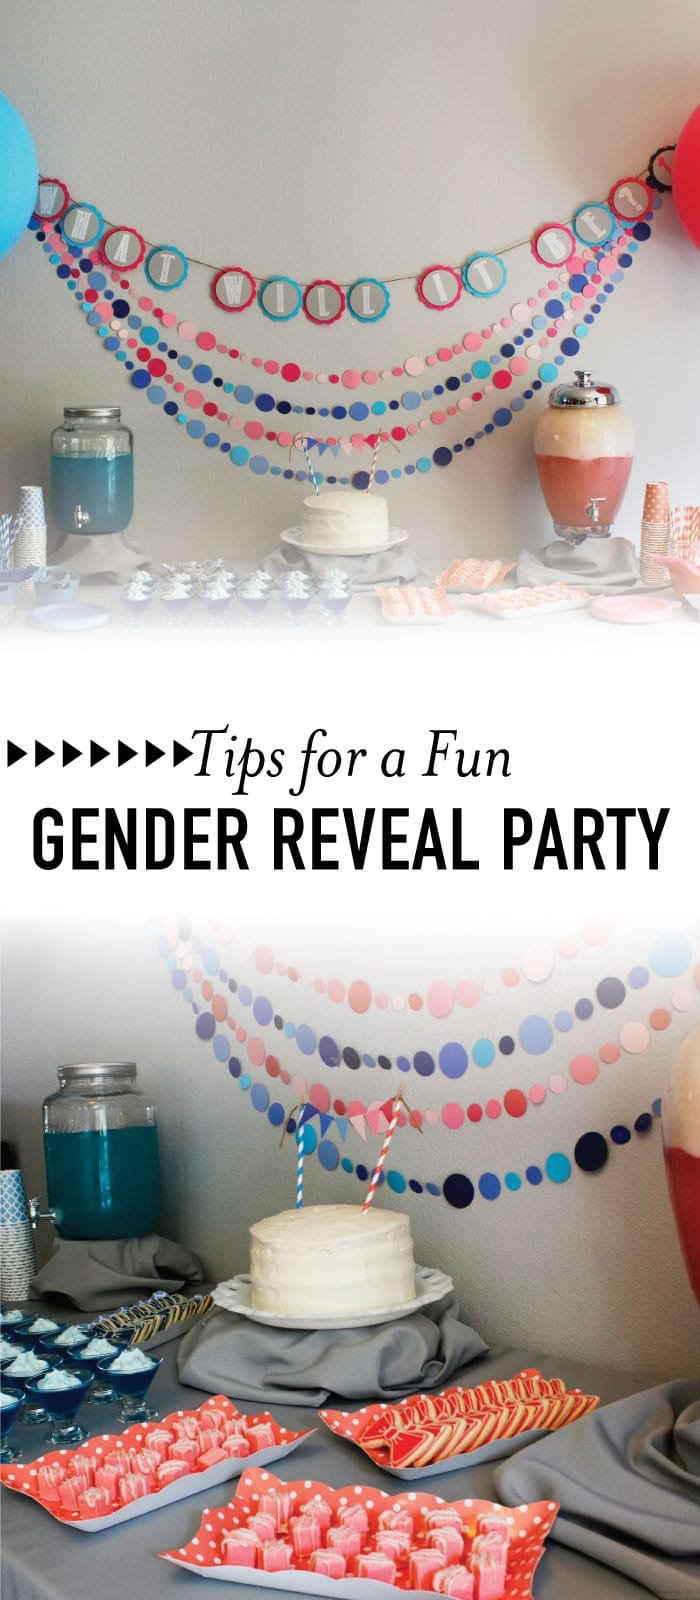 Gender Reveal Party Ideas Blog
 Tips for a DIY Gender Reveal Party